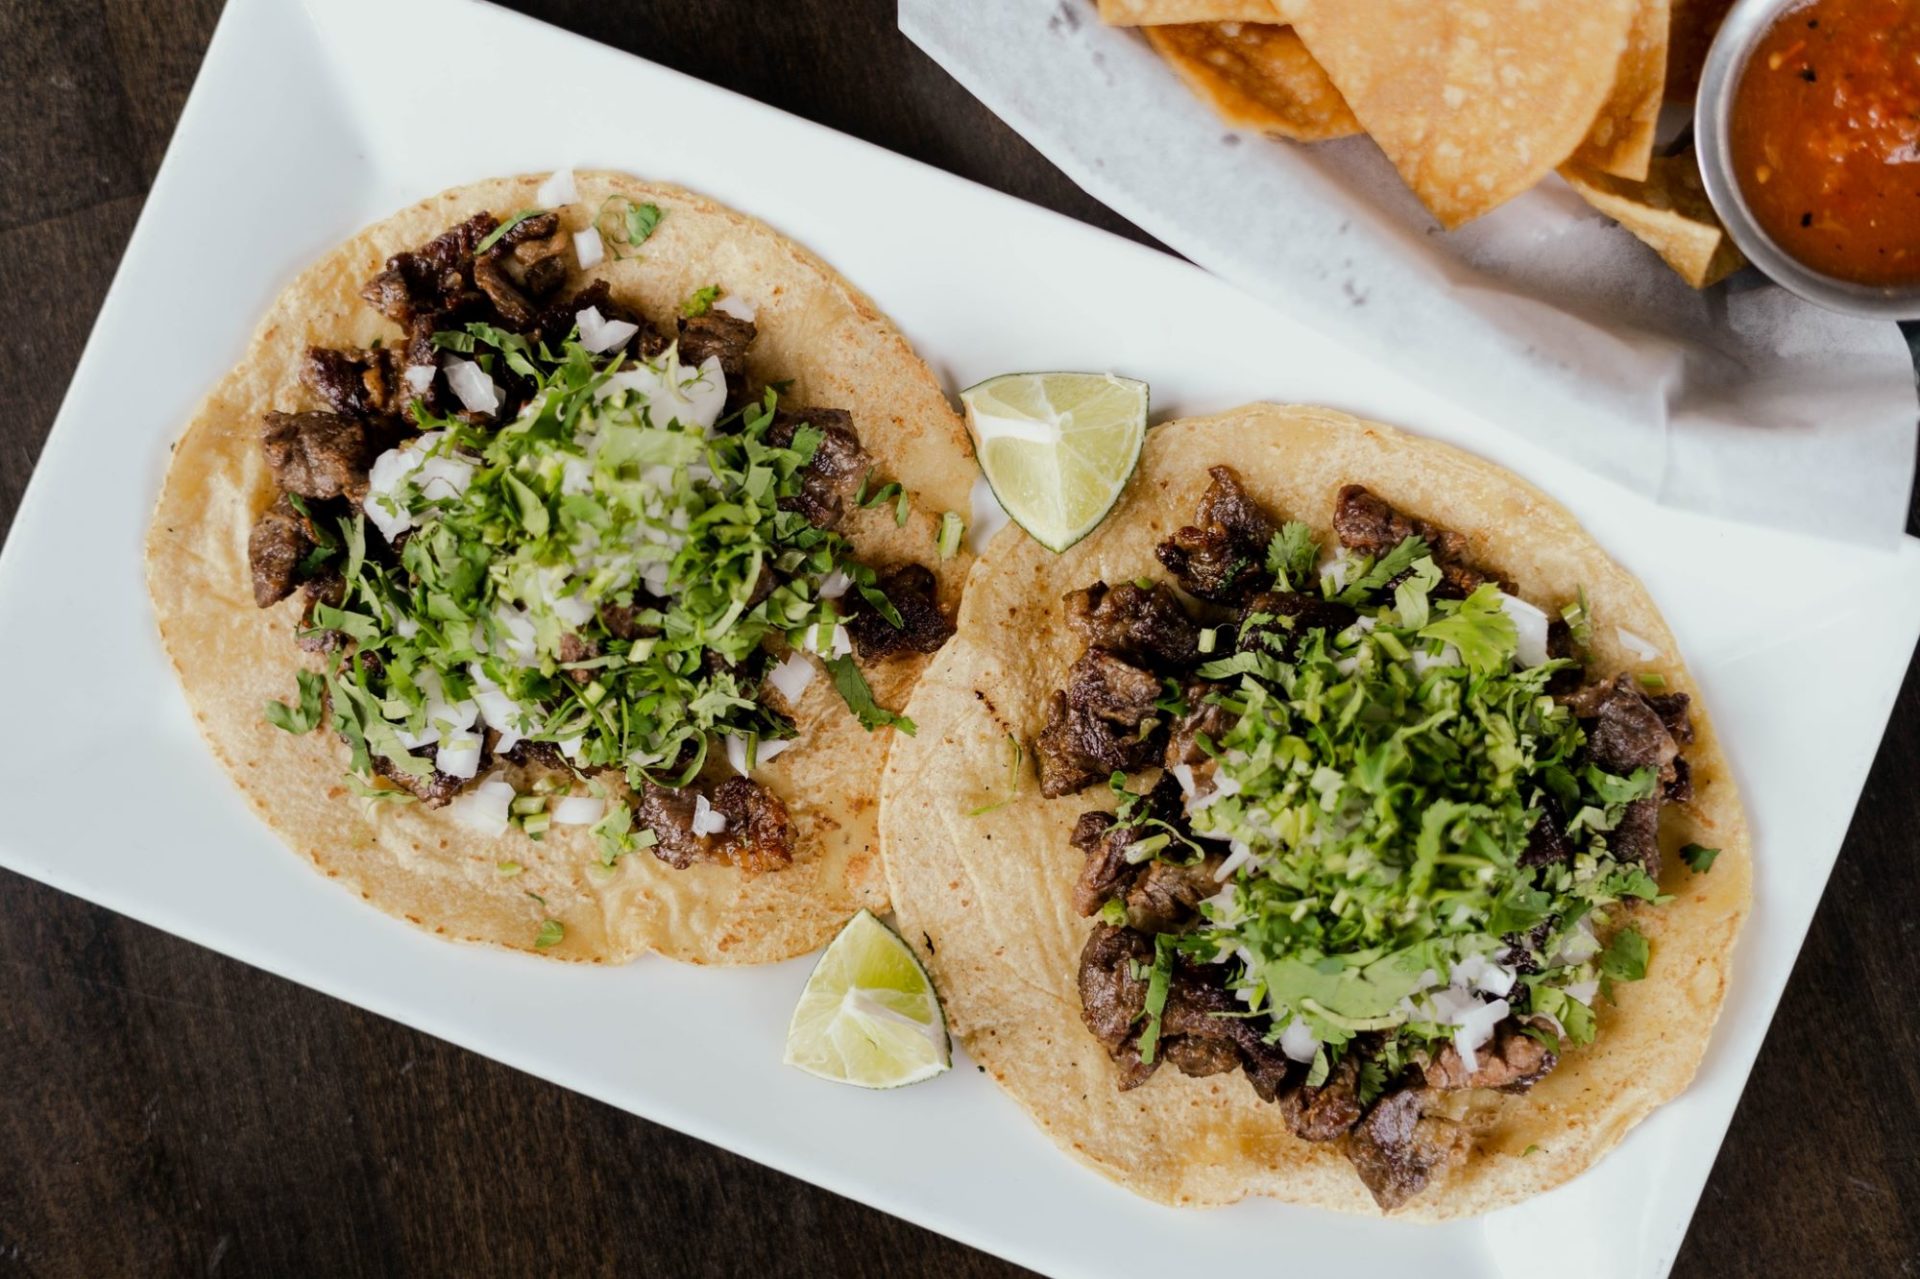 Two tacos on round tortillas with steak, onion pieces, and green cilantro sit side by side on a white rectangular plate.